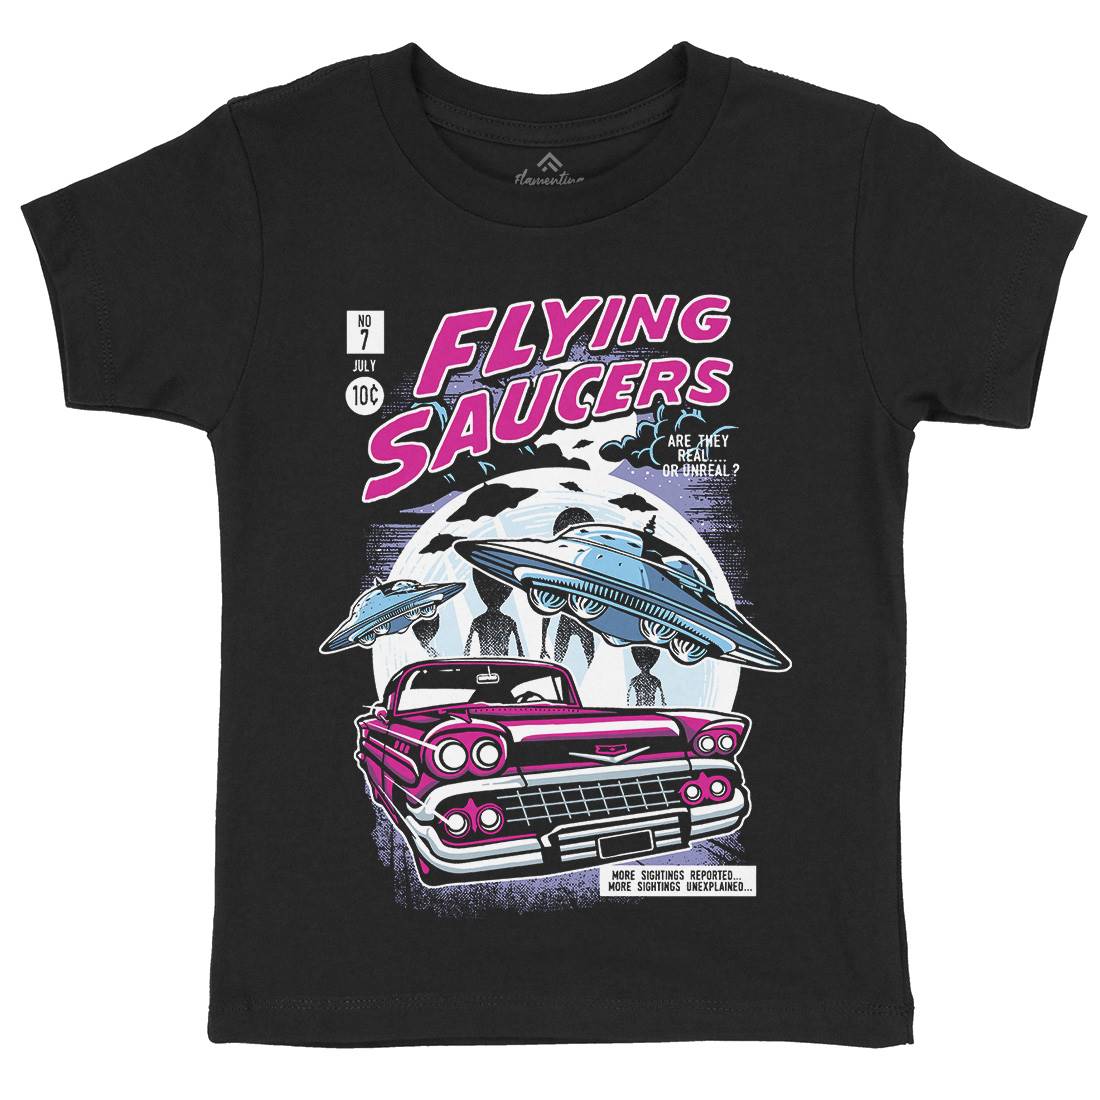 Flying Saucers Kids Crew Neck T-Shirt Space A531